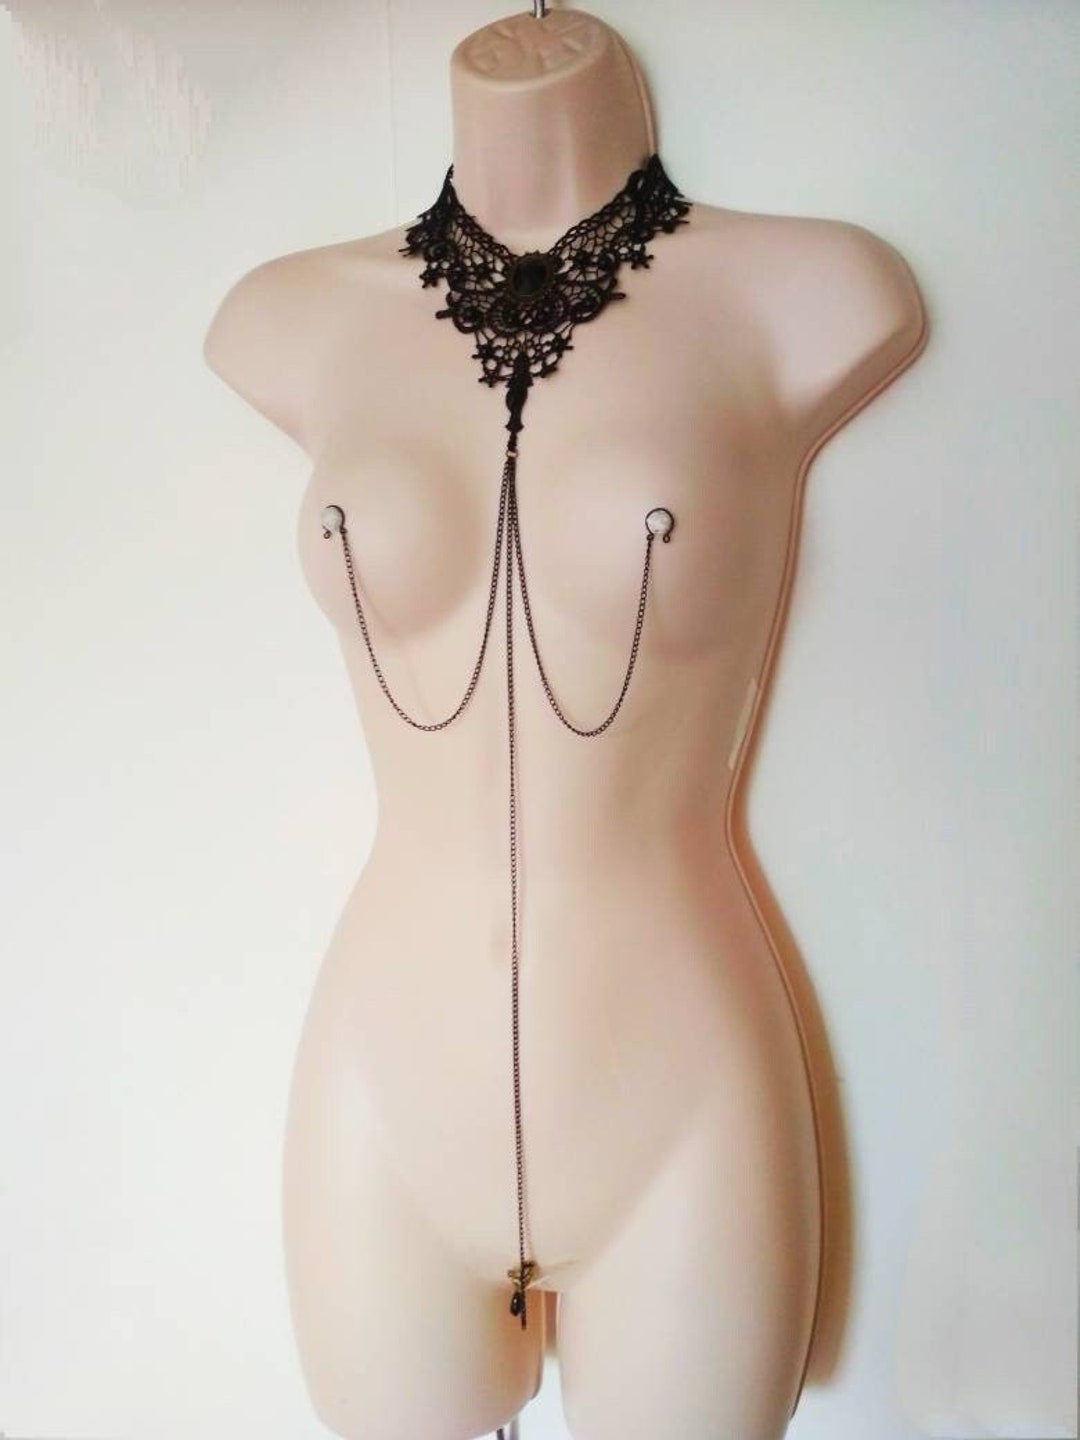 Black Choker Necklace to Clit Clip and Nipple Chains Domina photo pic